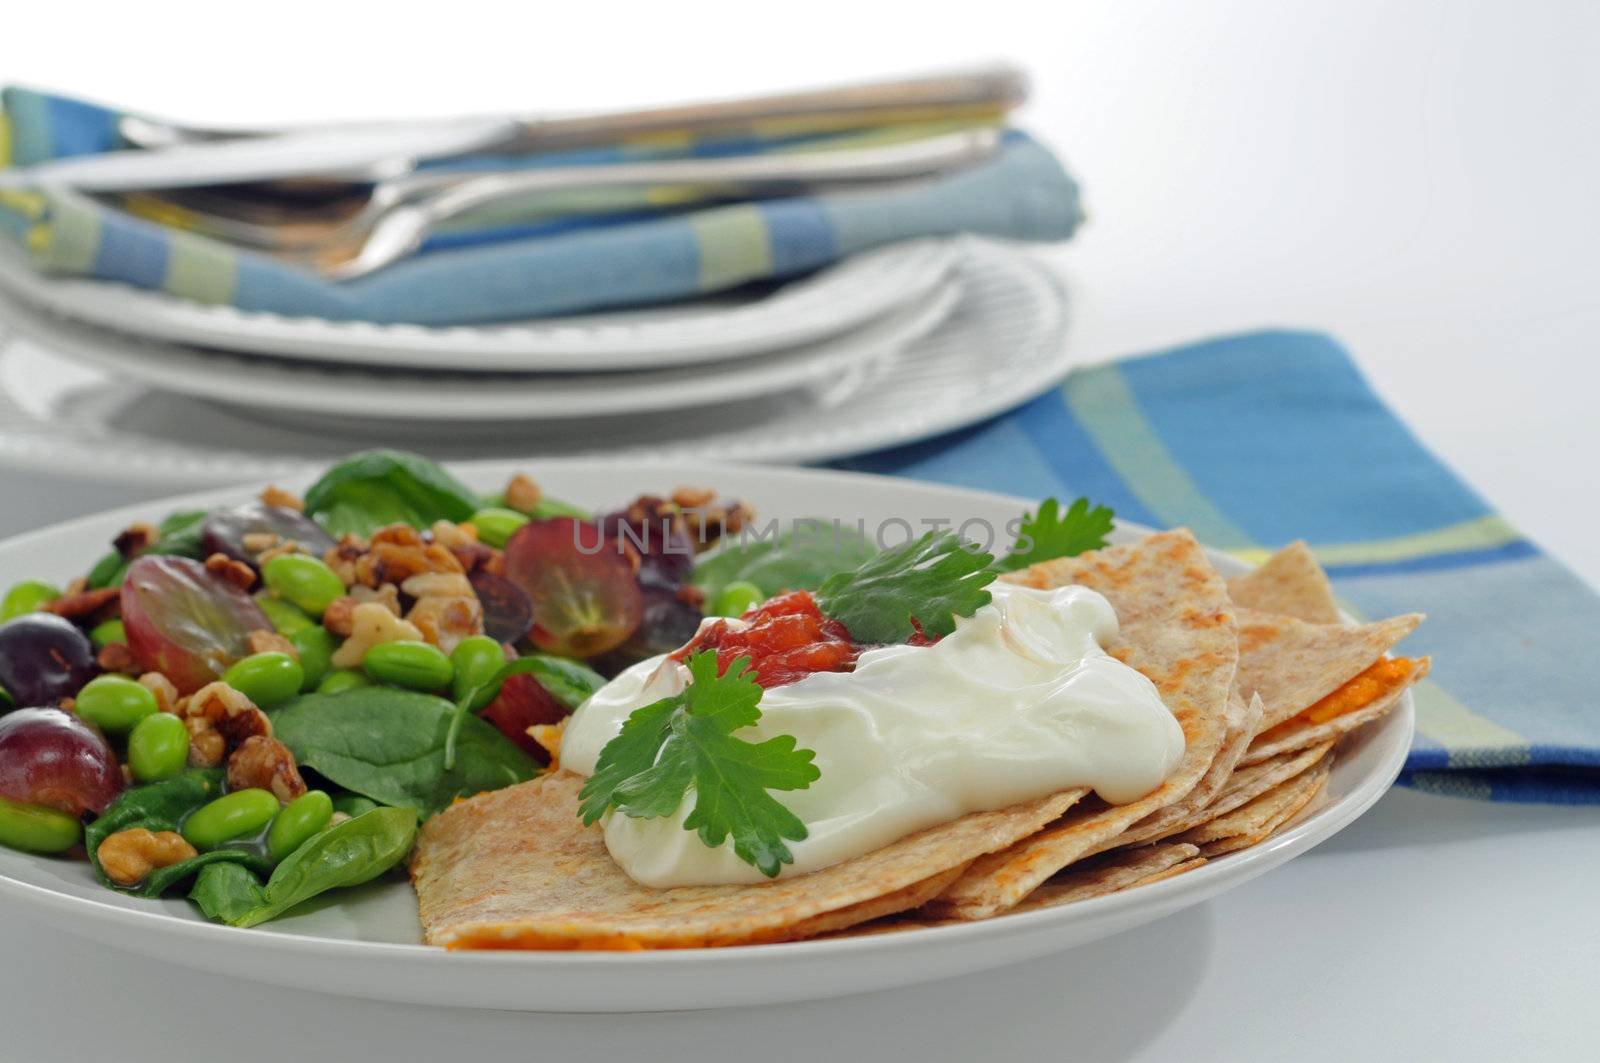 Delicious yam quesadillas served with a tasty salad.